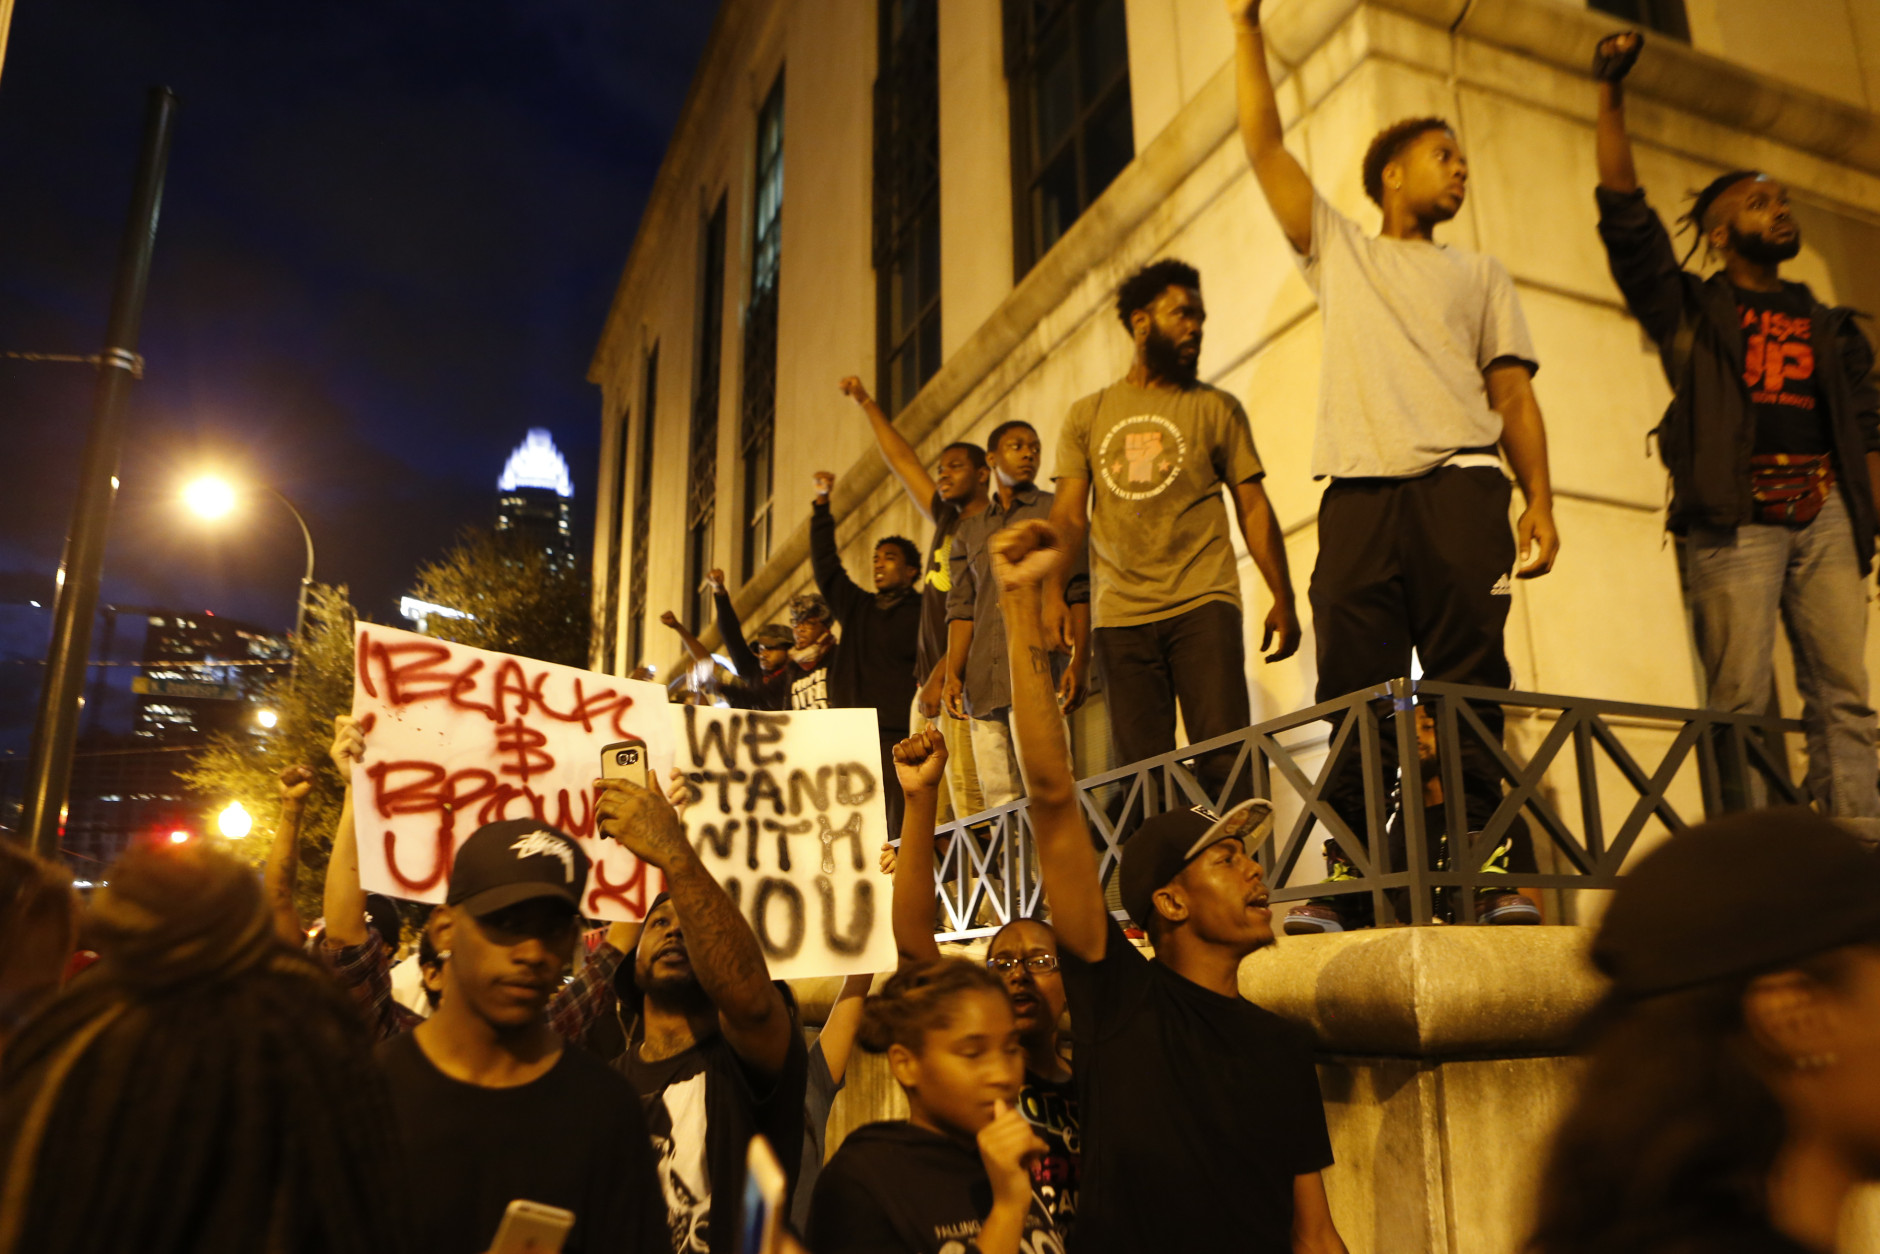 CHARLOTTE, NC - SEPTEMBER 21:  Protestors surround the Charlotte Police department as residents and activists protest the death of Keith Scott September 21, 2016 in Charlotte, North Carolina. Scott, who was black, was shot and killed at an apartment complex near UNC Charlotte by police officers, who say they warned Scott to drop a gun he was allegedly holding.  (Photo by Brian Blanco/Getty Images)